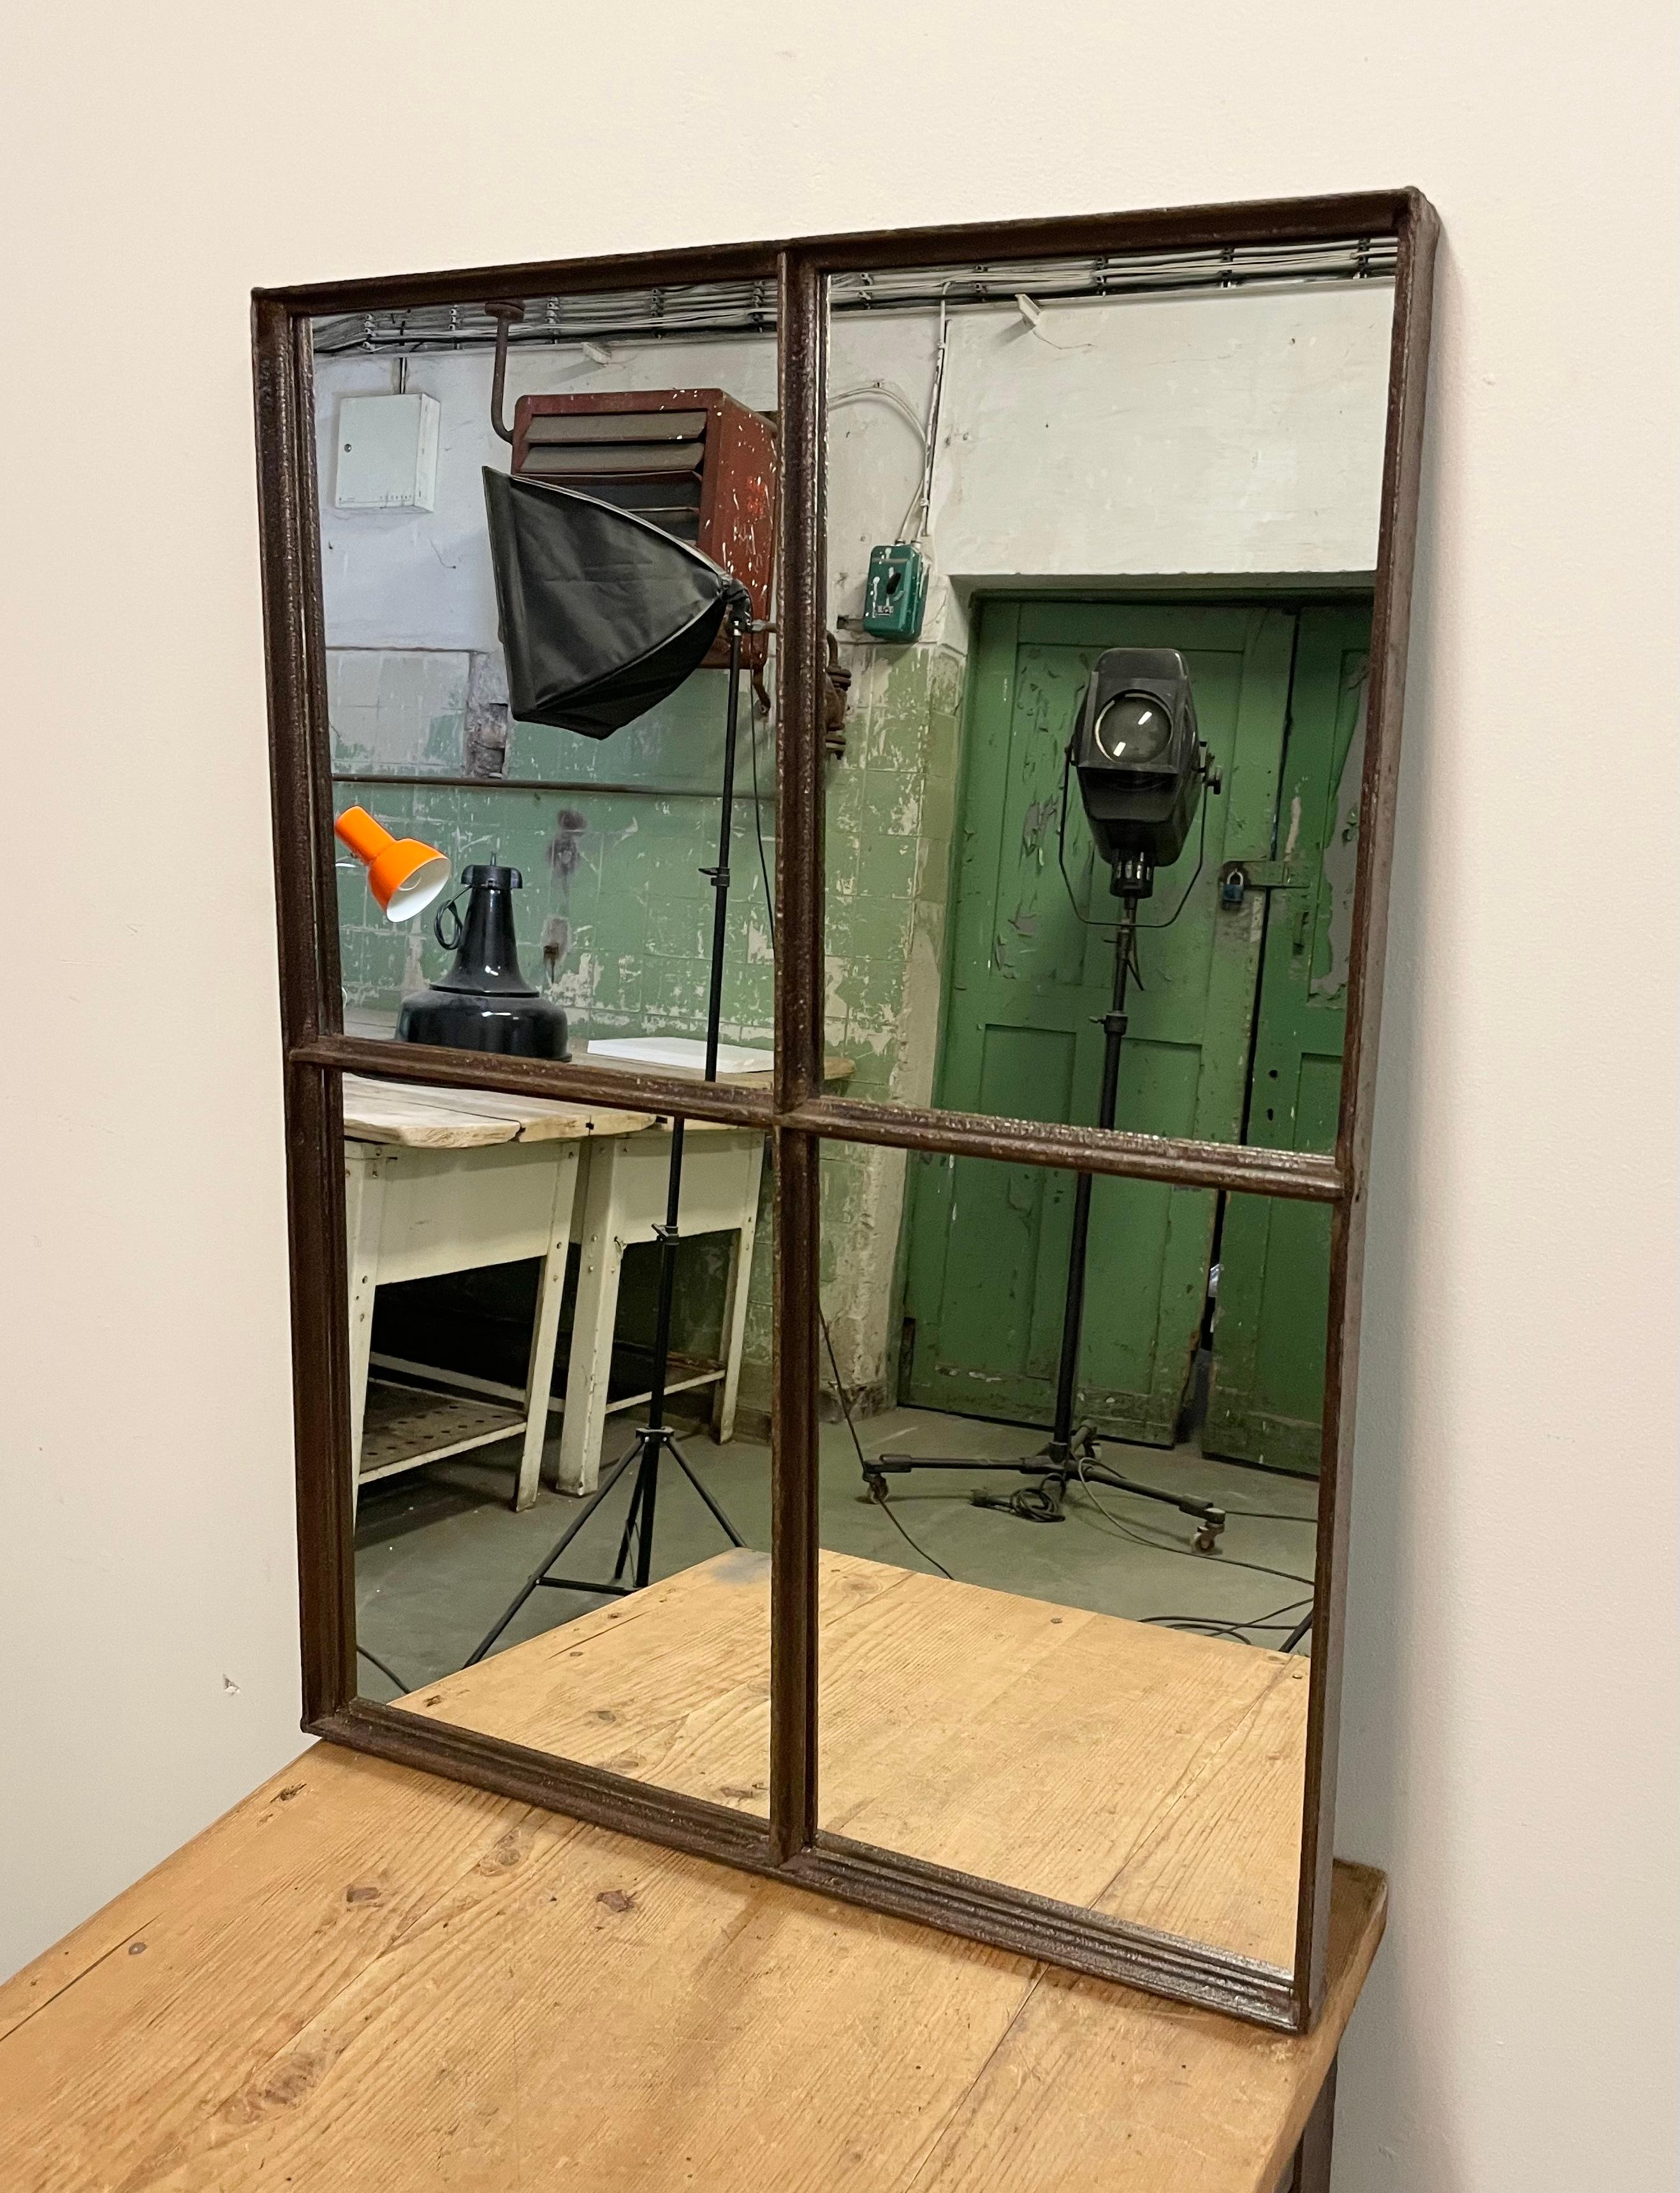 This iron industrial window frame has been transformed into a mirror. The weight of the mirror is 17 kg.